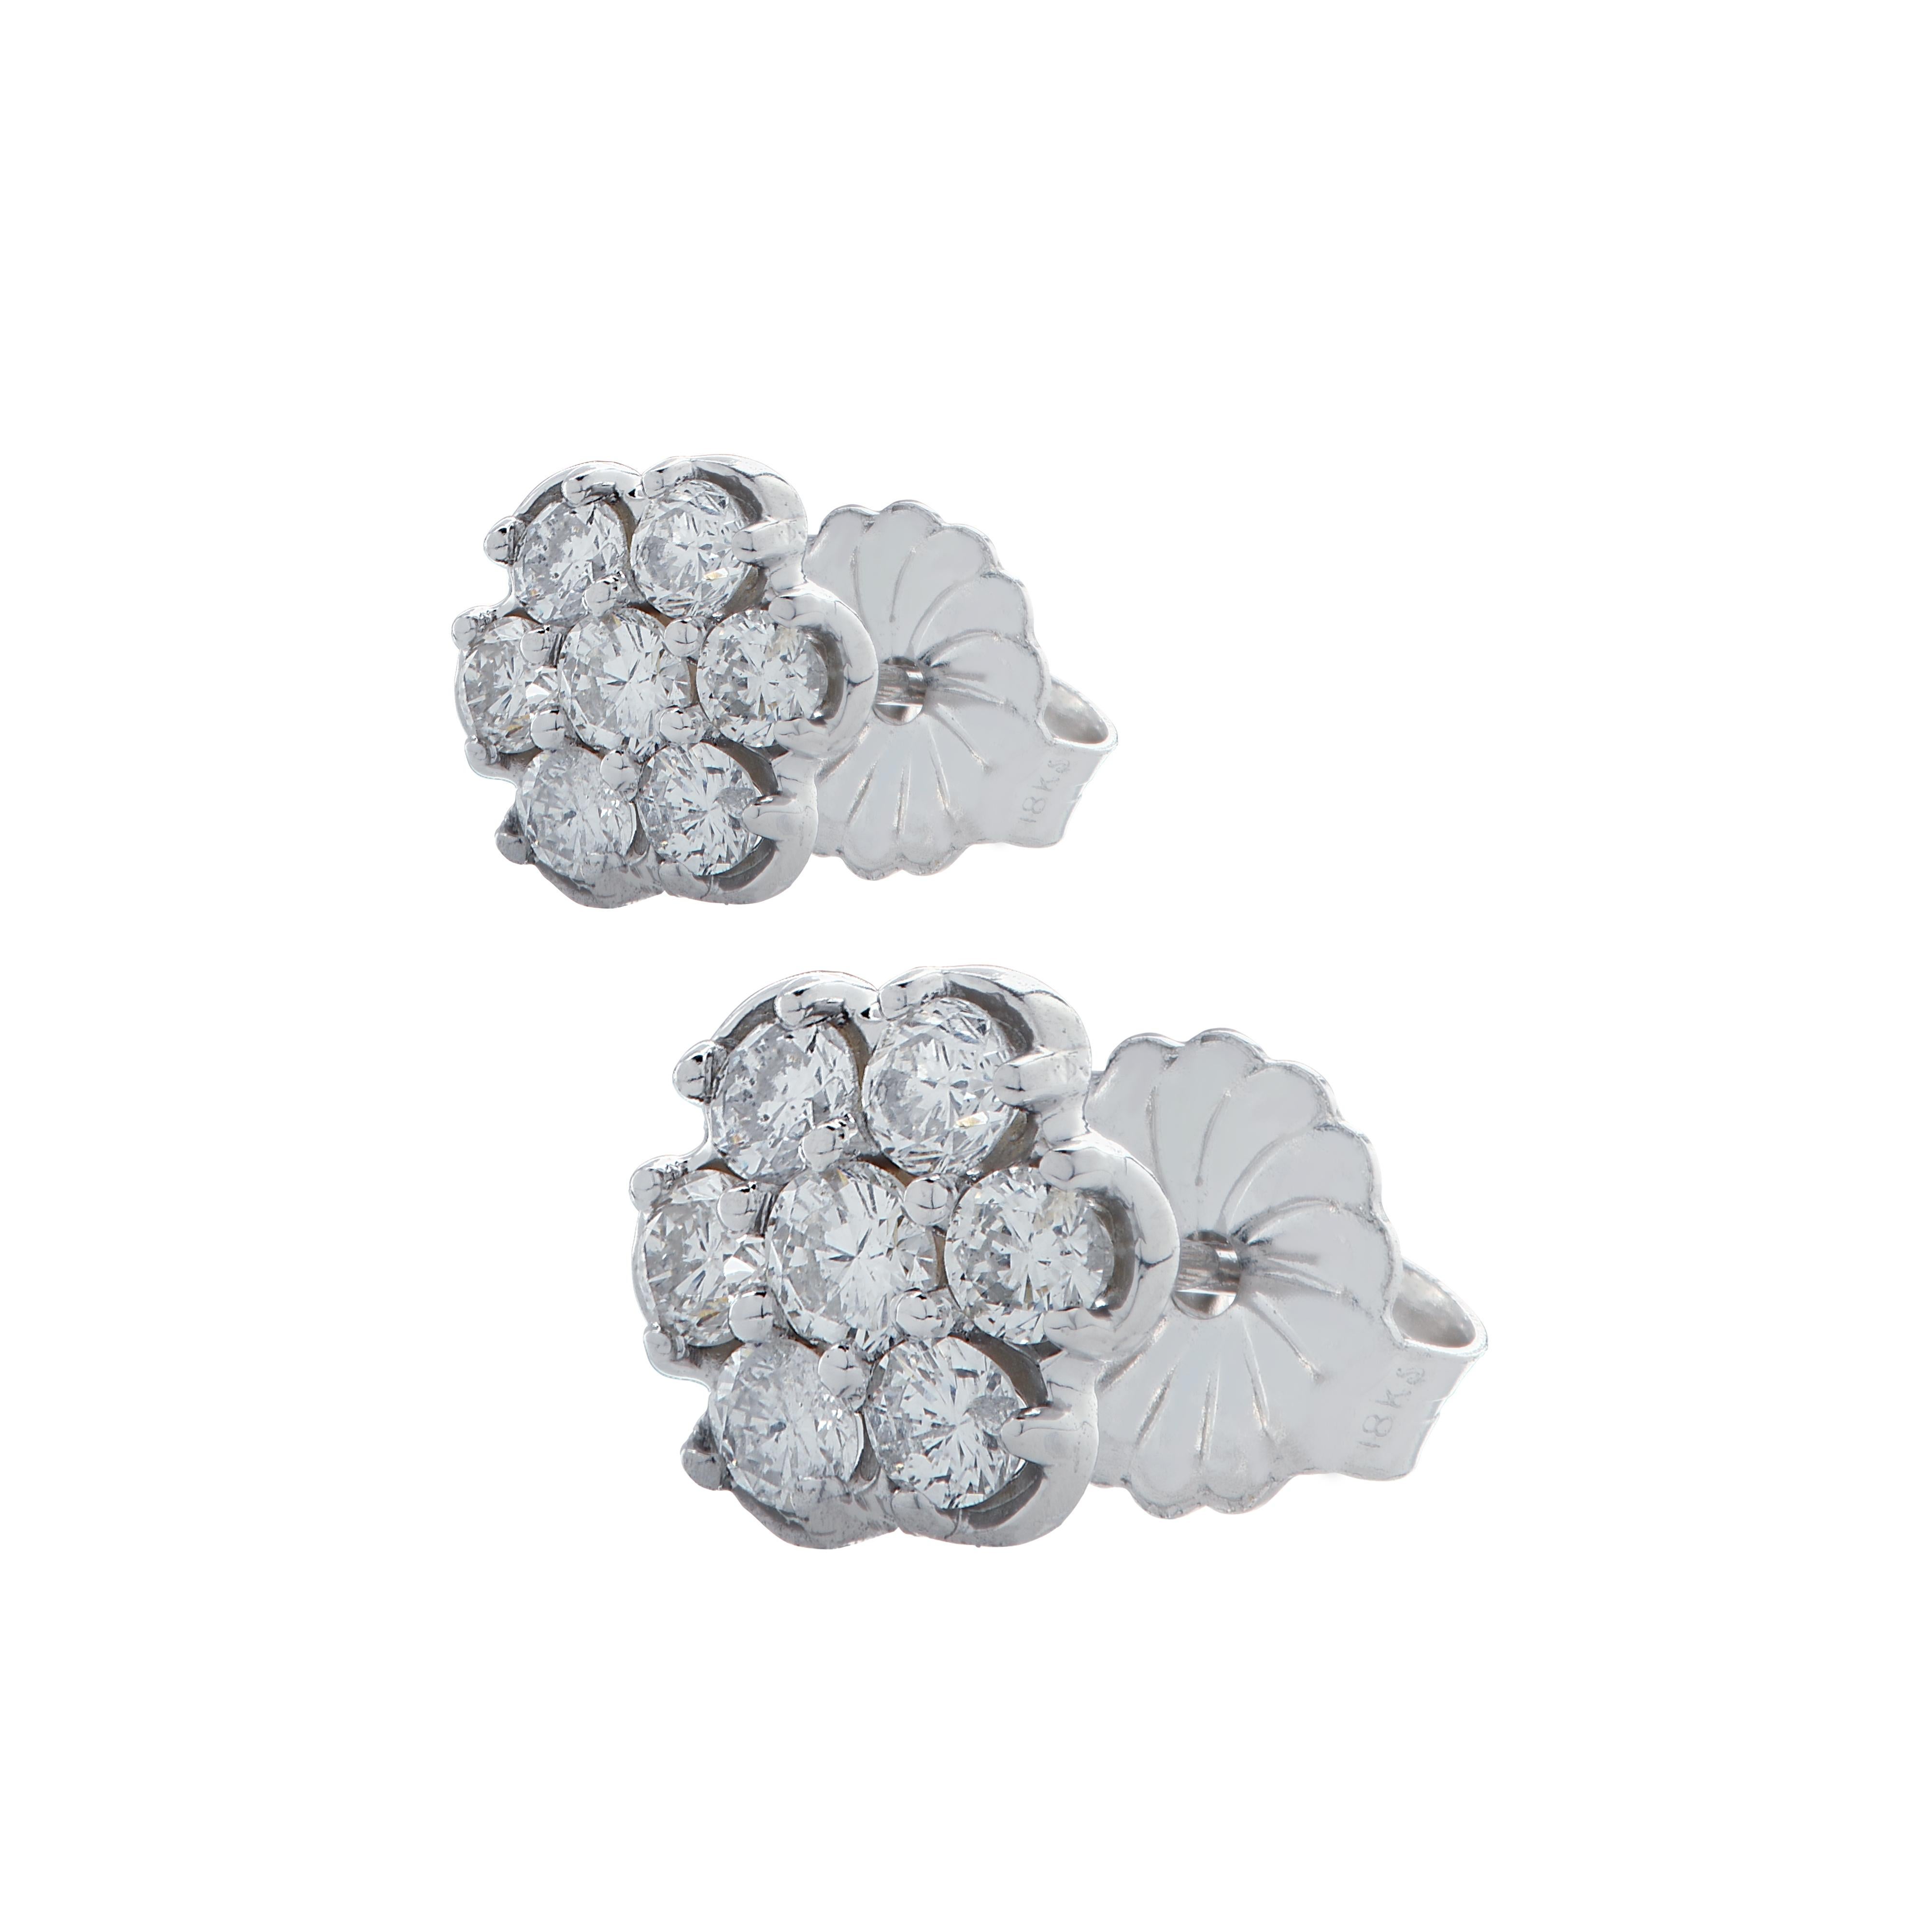 Delightful stud earrings crafted in white gold, featuring 14 round brilliant cut diamonds weighing 1 carat total, G color, VS-SI clarity, arranged in a flower design that captures the unparalleled beauty of nature.  These whimsical earrings measure